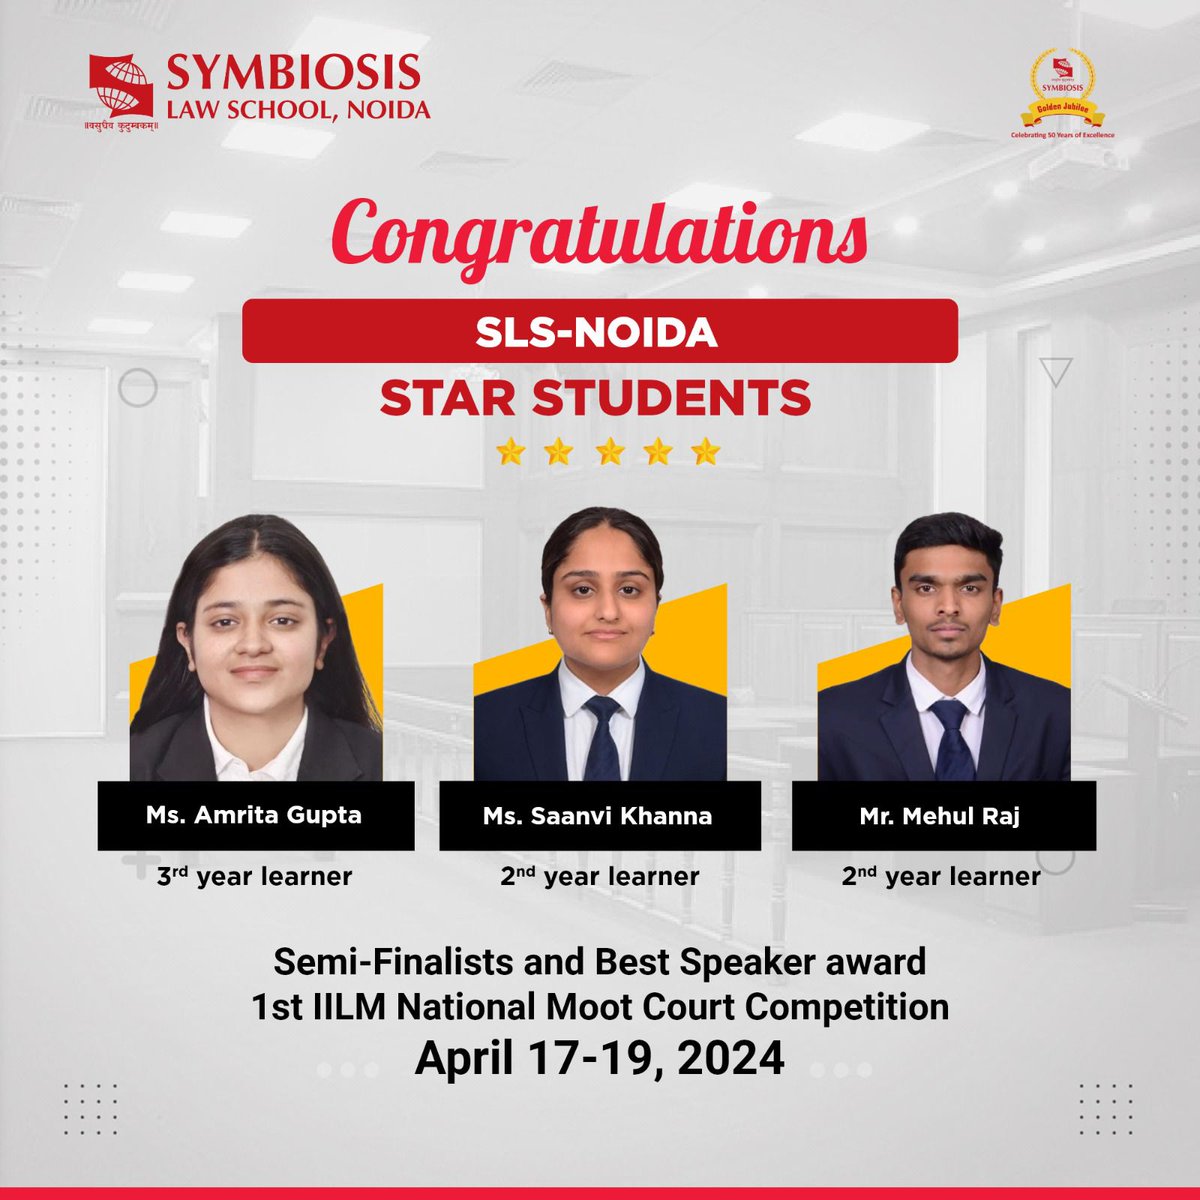 #Achievement| Semi Finalists & Best Speaker Award | 1st IILM National Moot Court Competition, 2024

Competing against over 65 teams, they tackled complex legal issues, including the validity of contracts made via WhatsApp and constitutional aspects of Section 375 IPC.